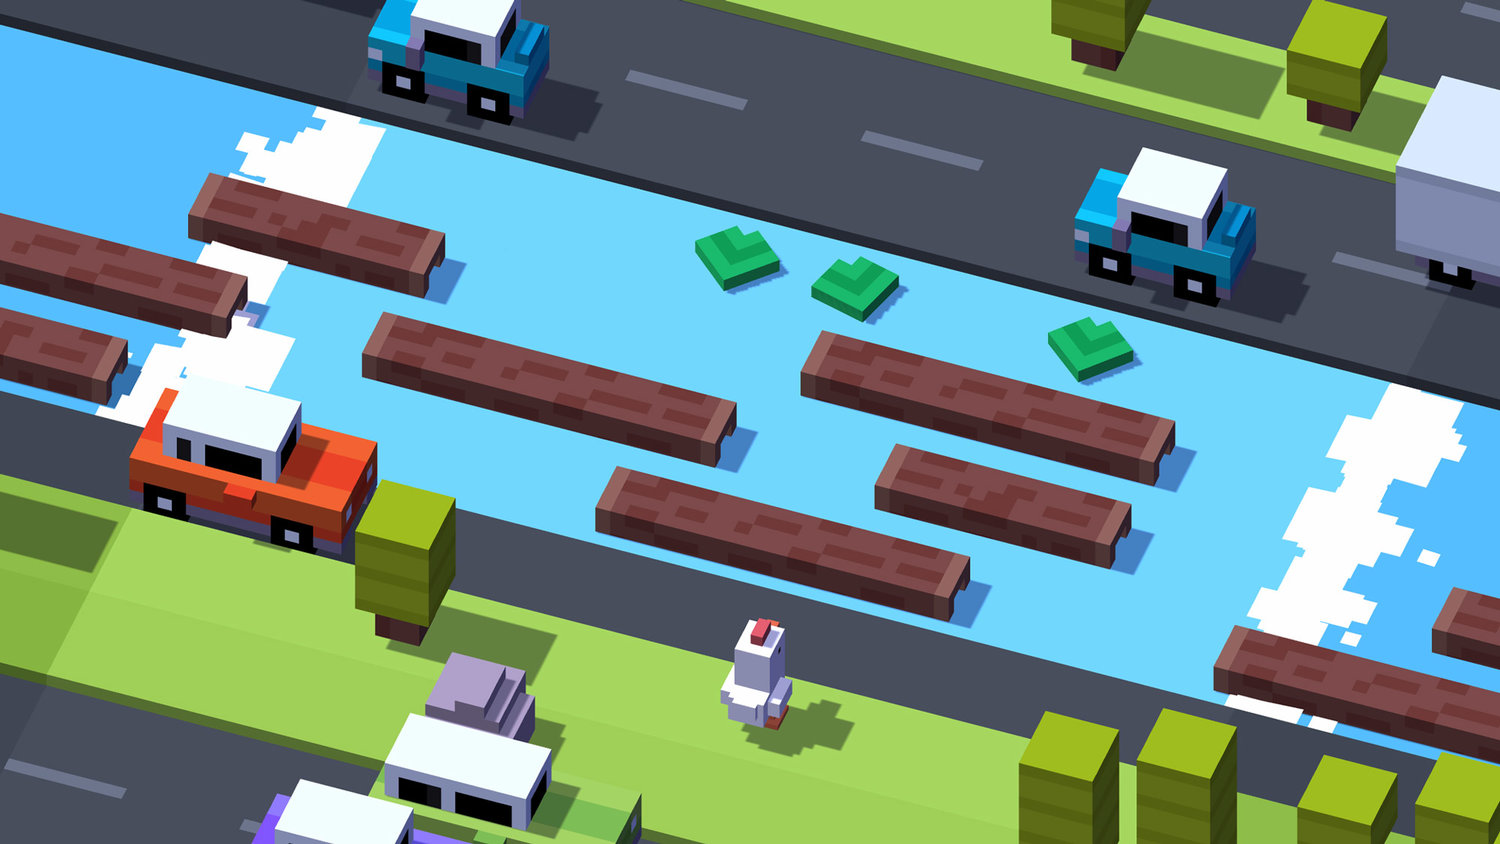 Crossy Road Game unblockedin Chrome with by